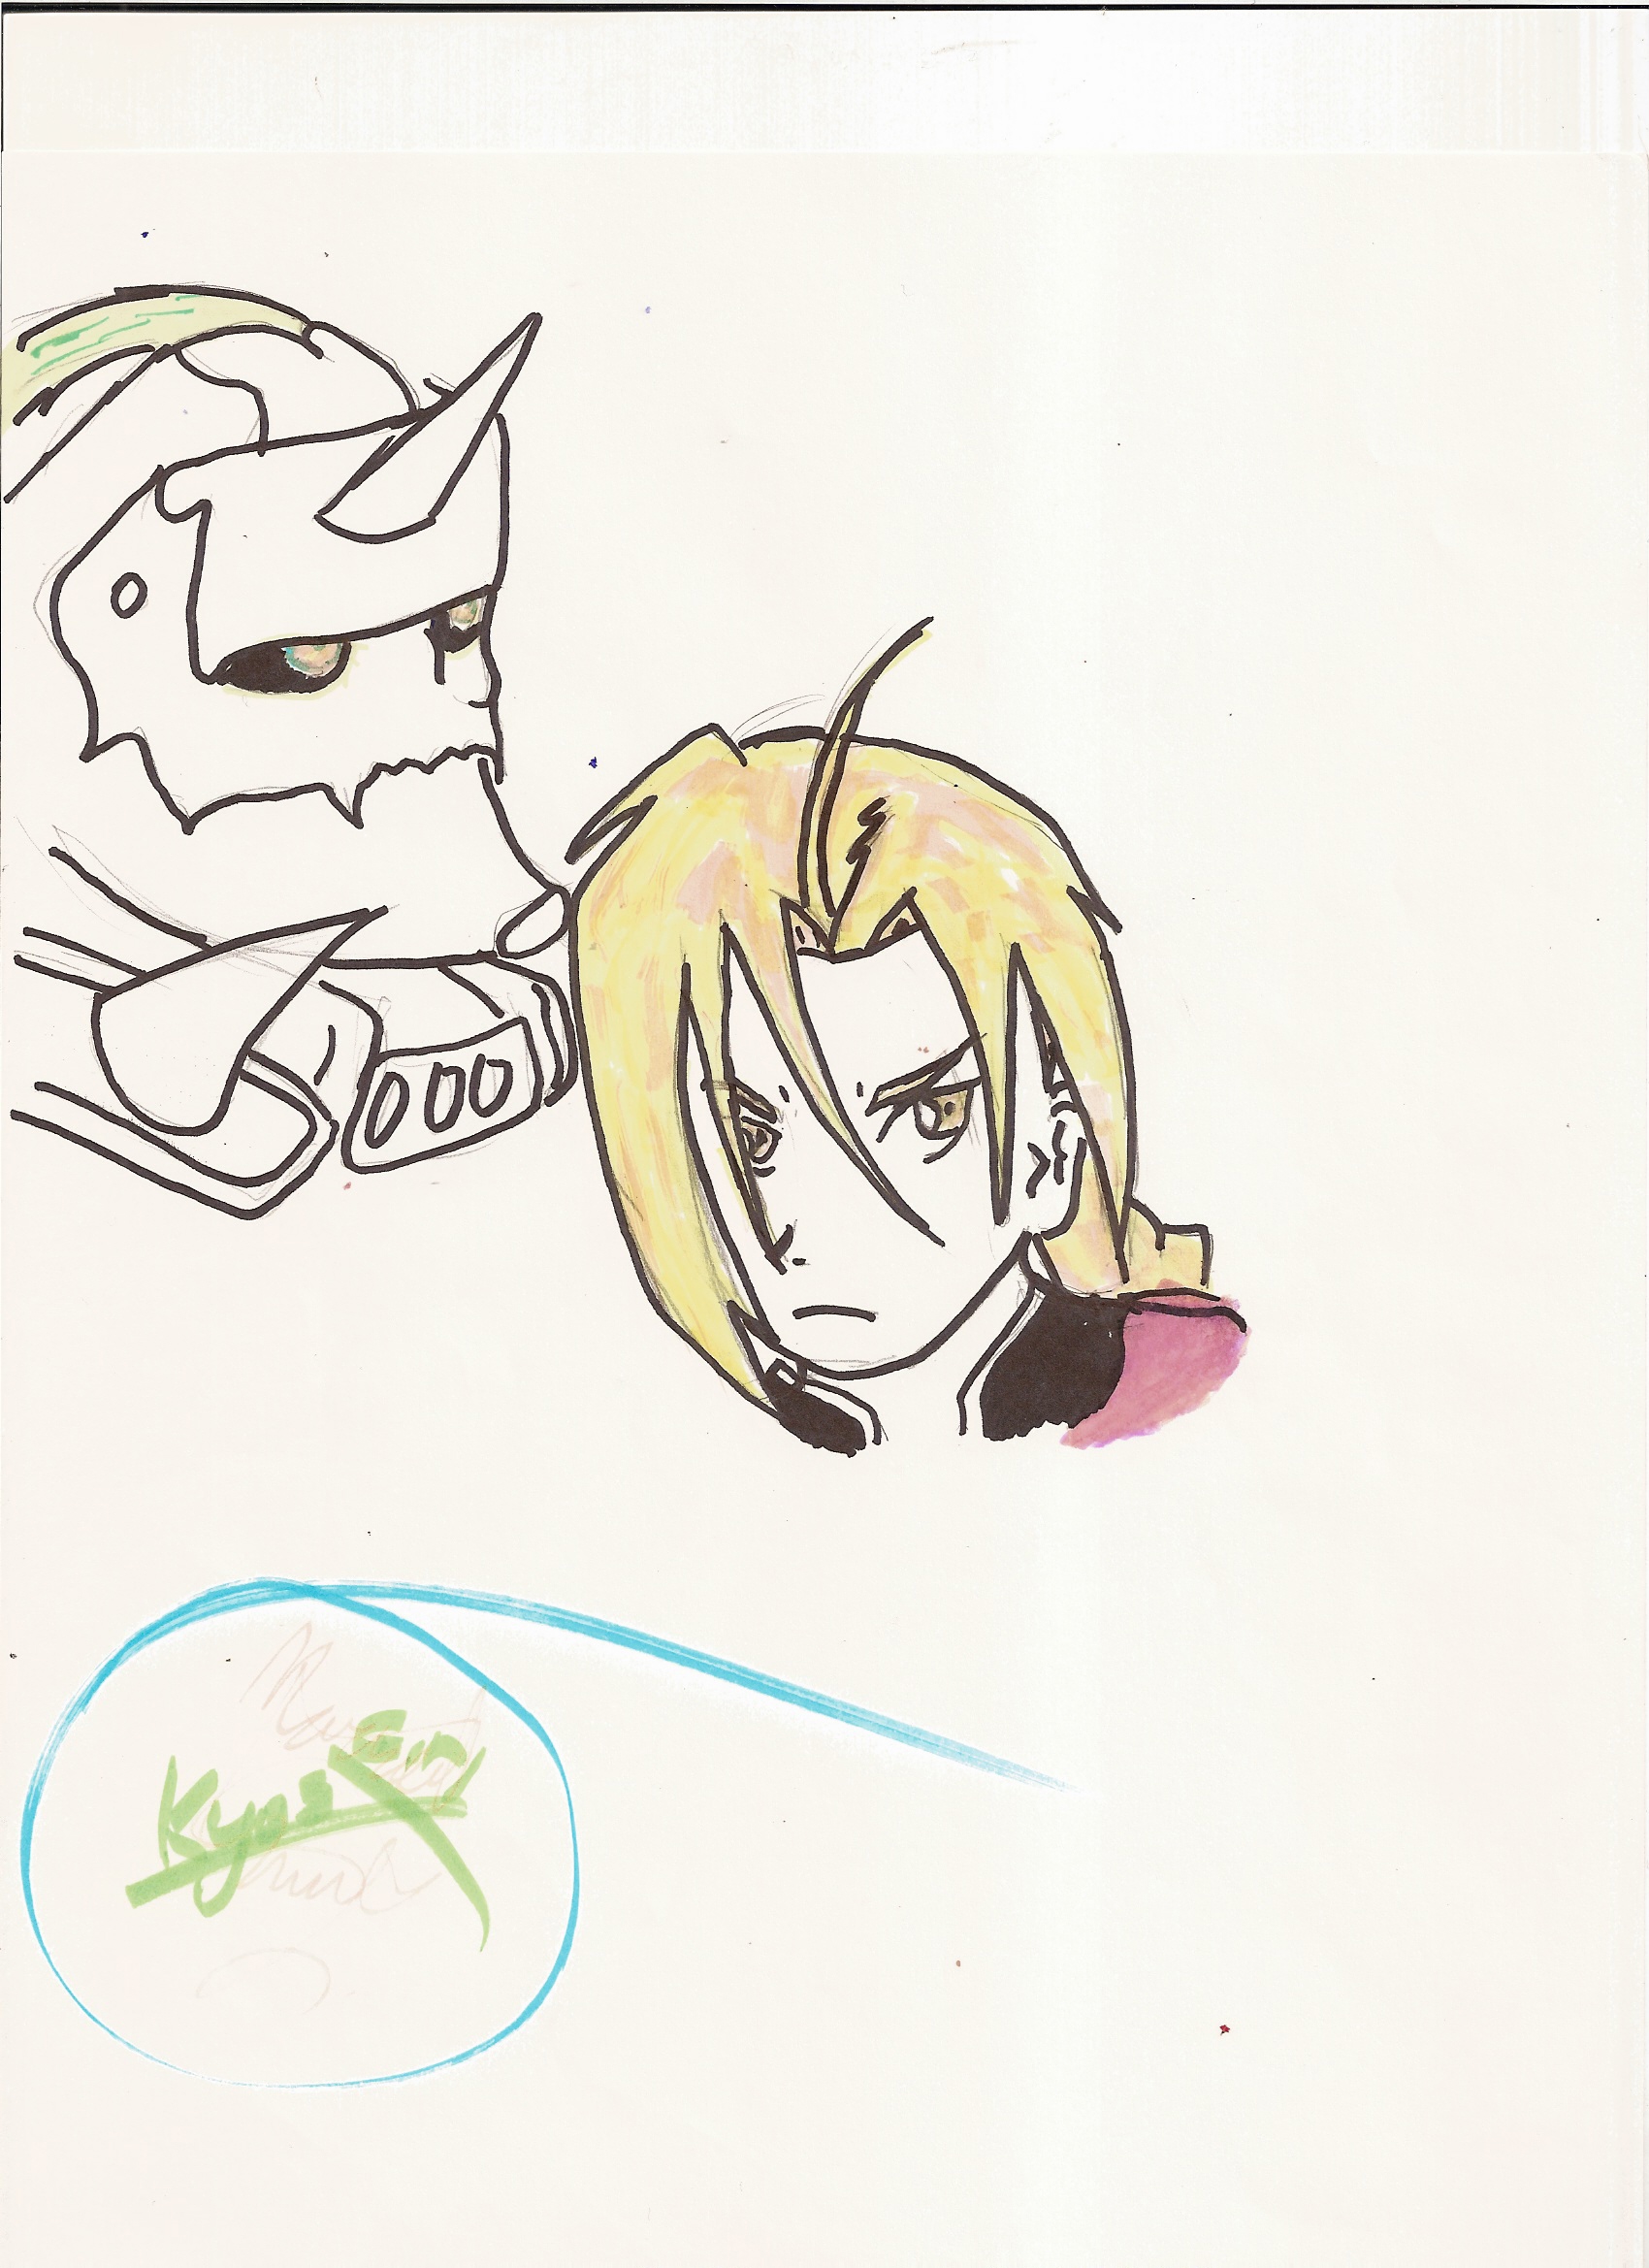 My 1st pic of the elric brothers done in hilighter by KyosGirl